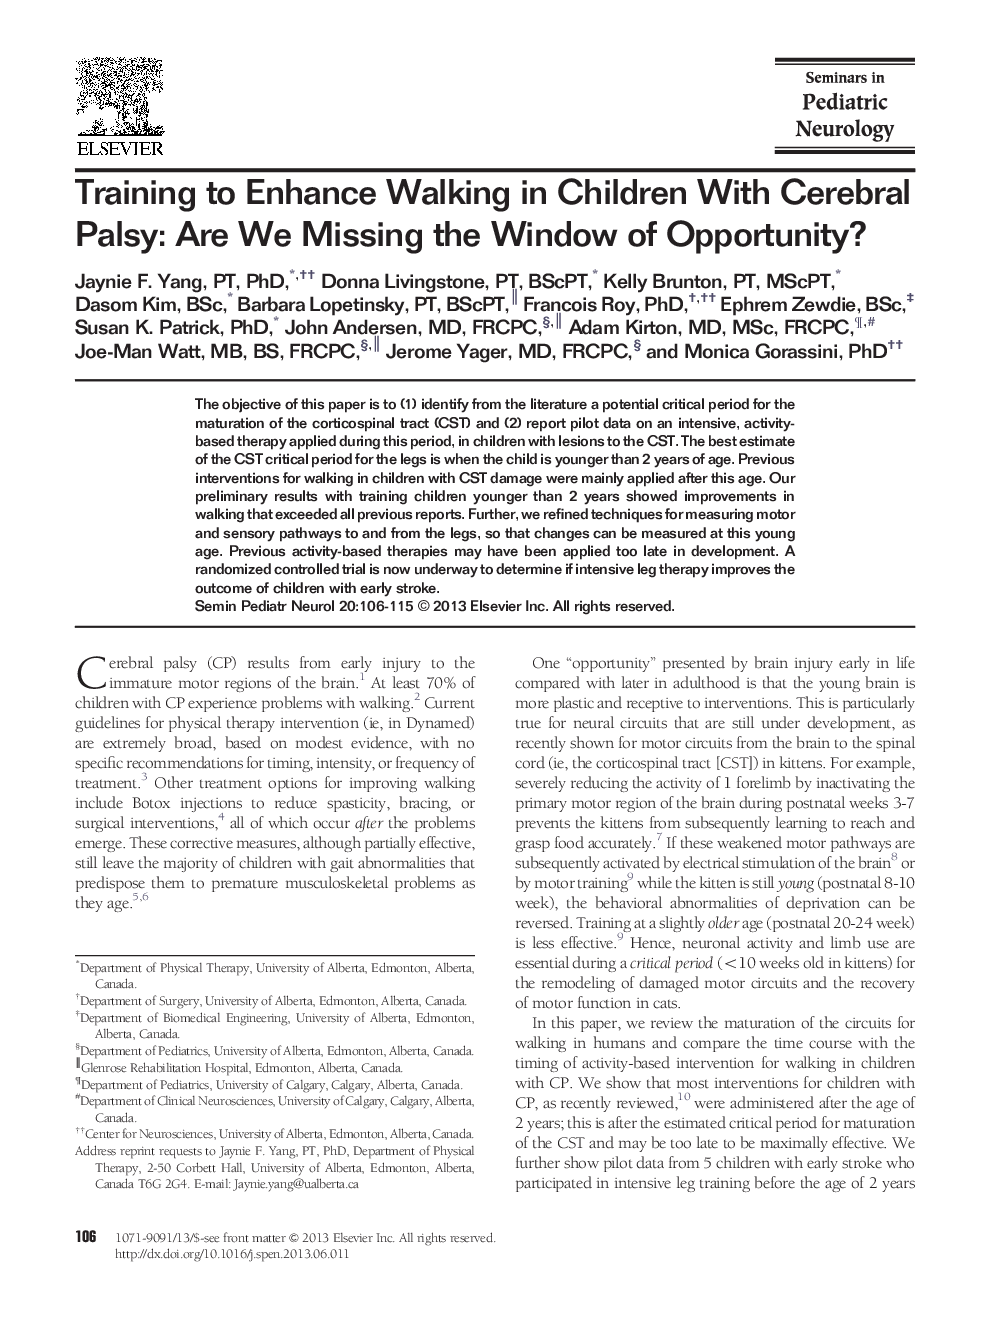 Training to Enhance Walking in Children With Cerebral Palsy: Are We Missing the Window of Opportunity?